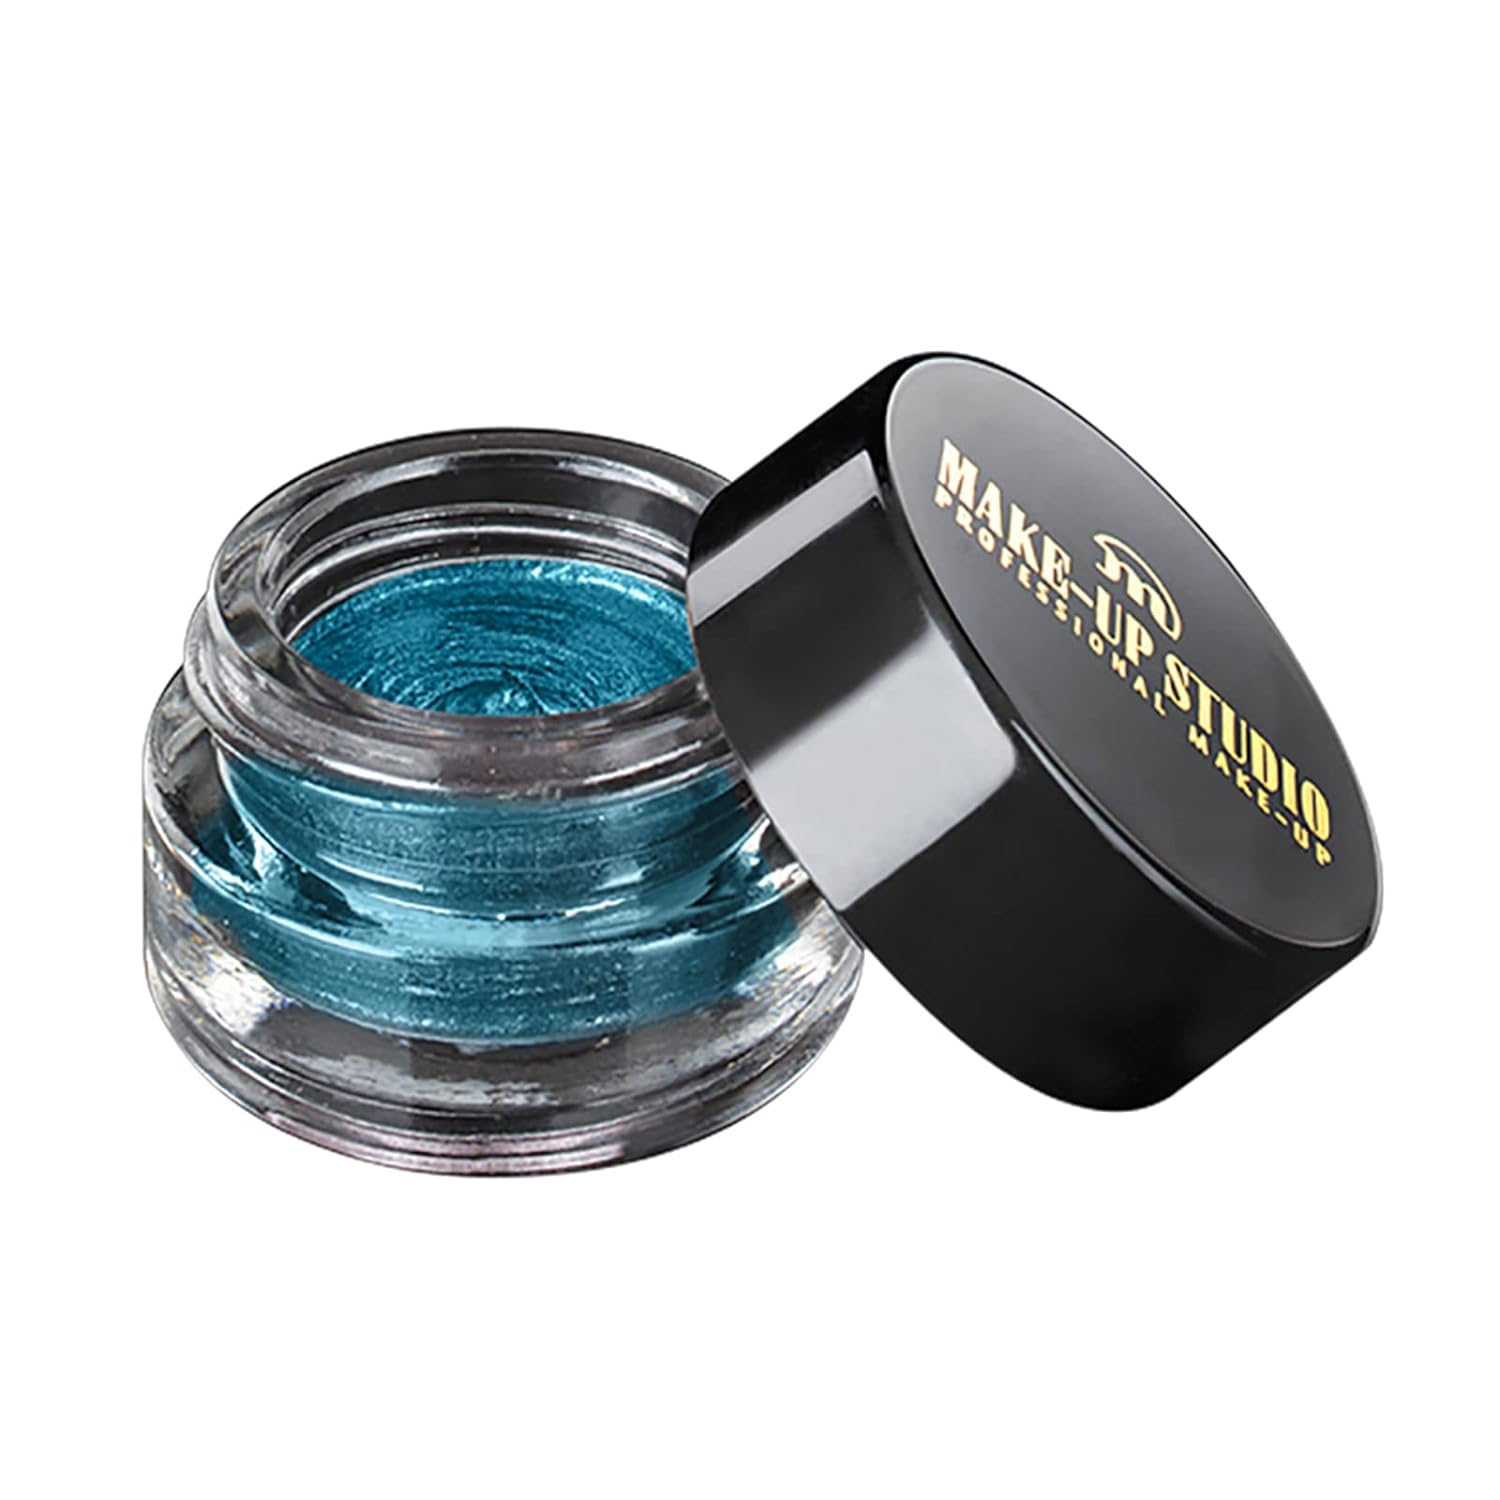 Make-Up Studio Professional Amsterdam Make-Up Durable Eyeshadow Mousse - For A Perfect Smokey Eye - Waterproof And Stays In Place All Day Long - Real Eye-Catcher - Easy To Apply - Turquoise Treasure - 0.17